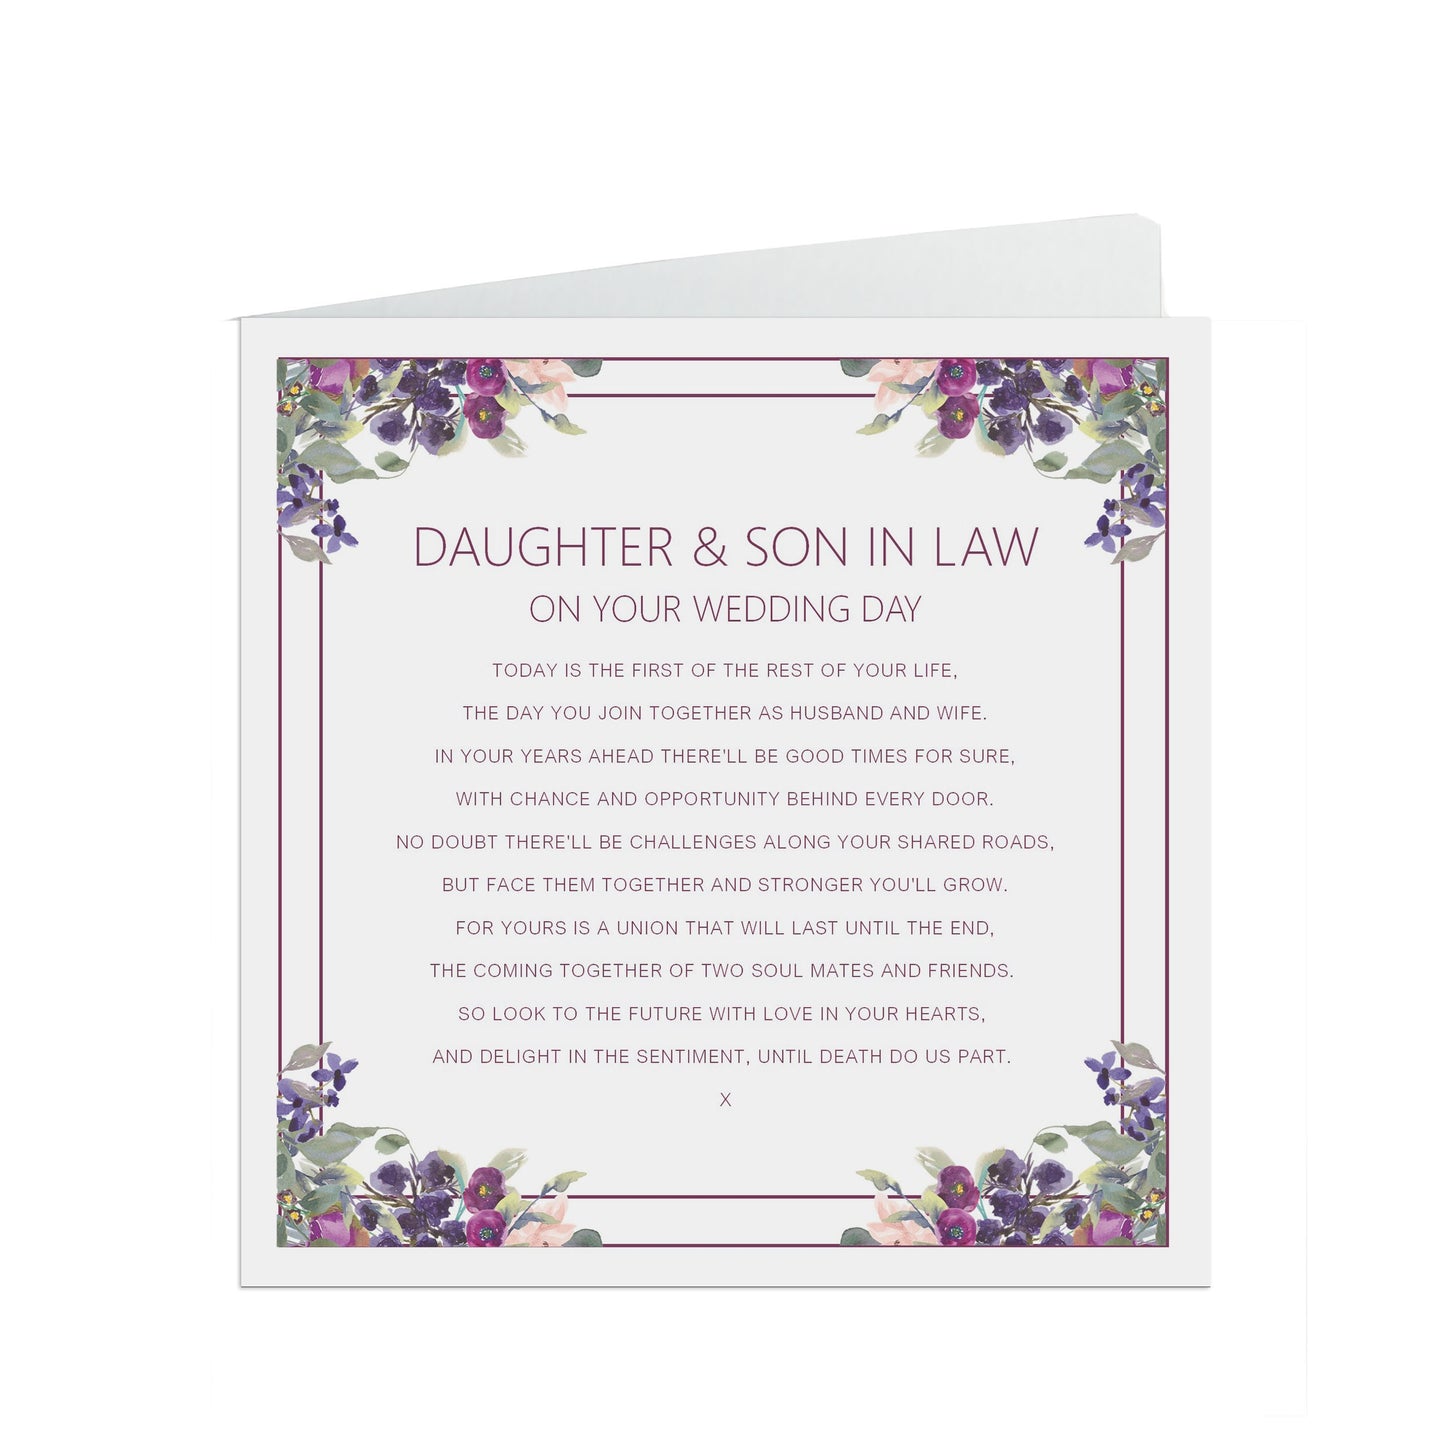 Daughter & Son In Law On Your Wedding Day Card, Purple Floral Design 6x6 Inches With A Kraft Envelope